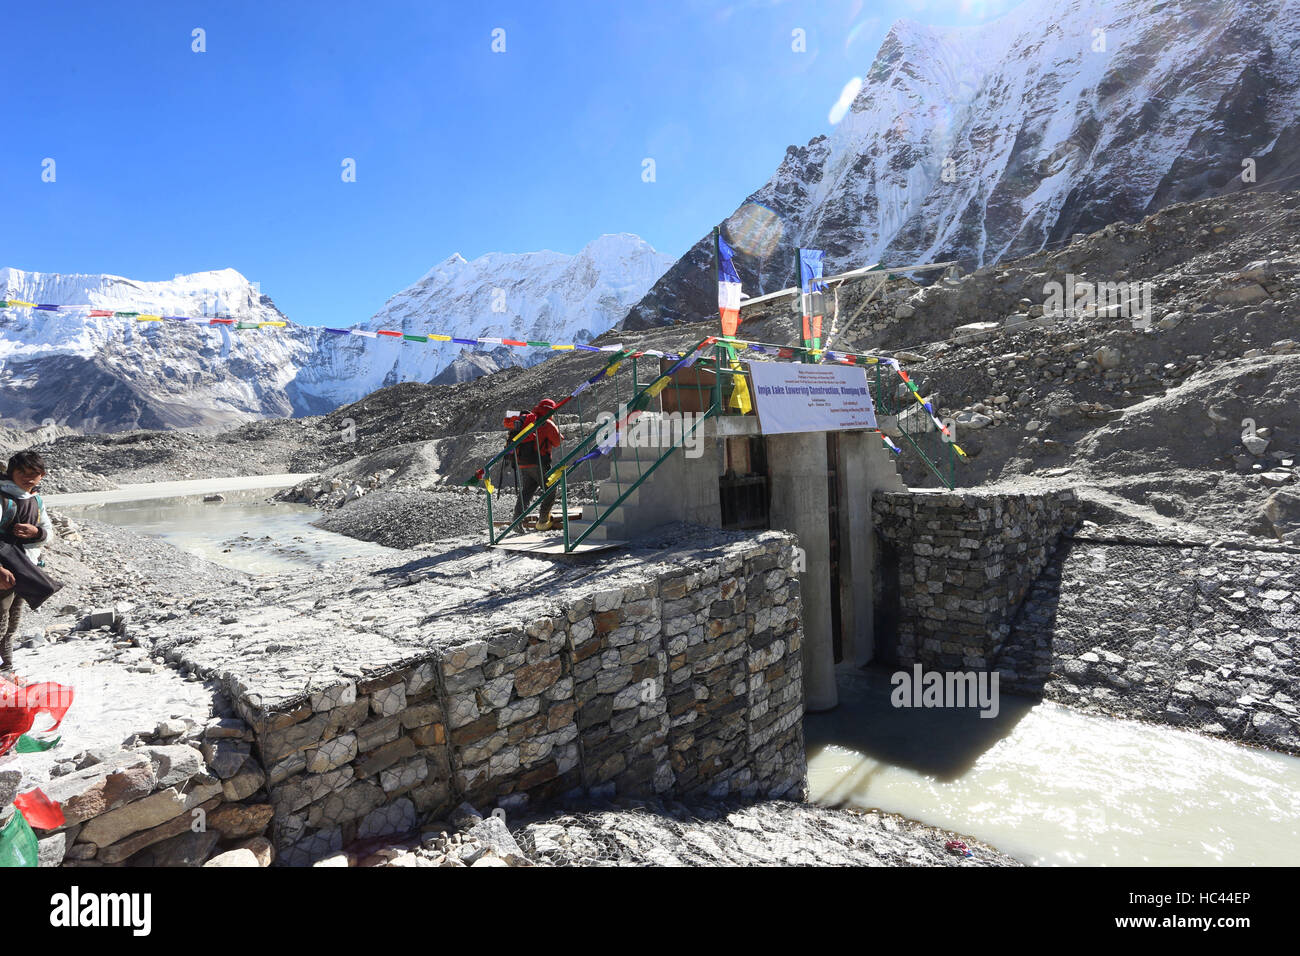 Solukhumbu, Nepal. 23rd Nov, 2016. Photo taken on Nov. 23, 2016 shows shows the channel gate constructed to lower the Imja lake in the Everest region of Solukhumbu, northern part of Nepal. Imja Lake, one of the biggest and most dangerous glacial lakes in the Himalayan country, is located at an altitude of 5010 meters above sea level. Community Based Flood and Glacial Lake Outburst Risk Reduction Project at Imja was completed recently under Nepal's Department of Hydrology and Meteorology and Nepal Army and has been funded by United Nations Development Fund.According to research, the lake Stock Photo